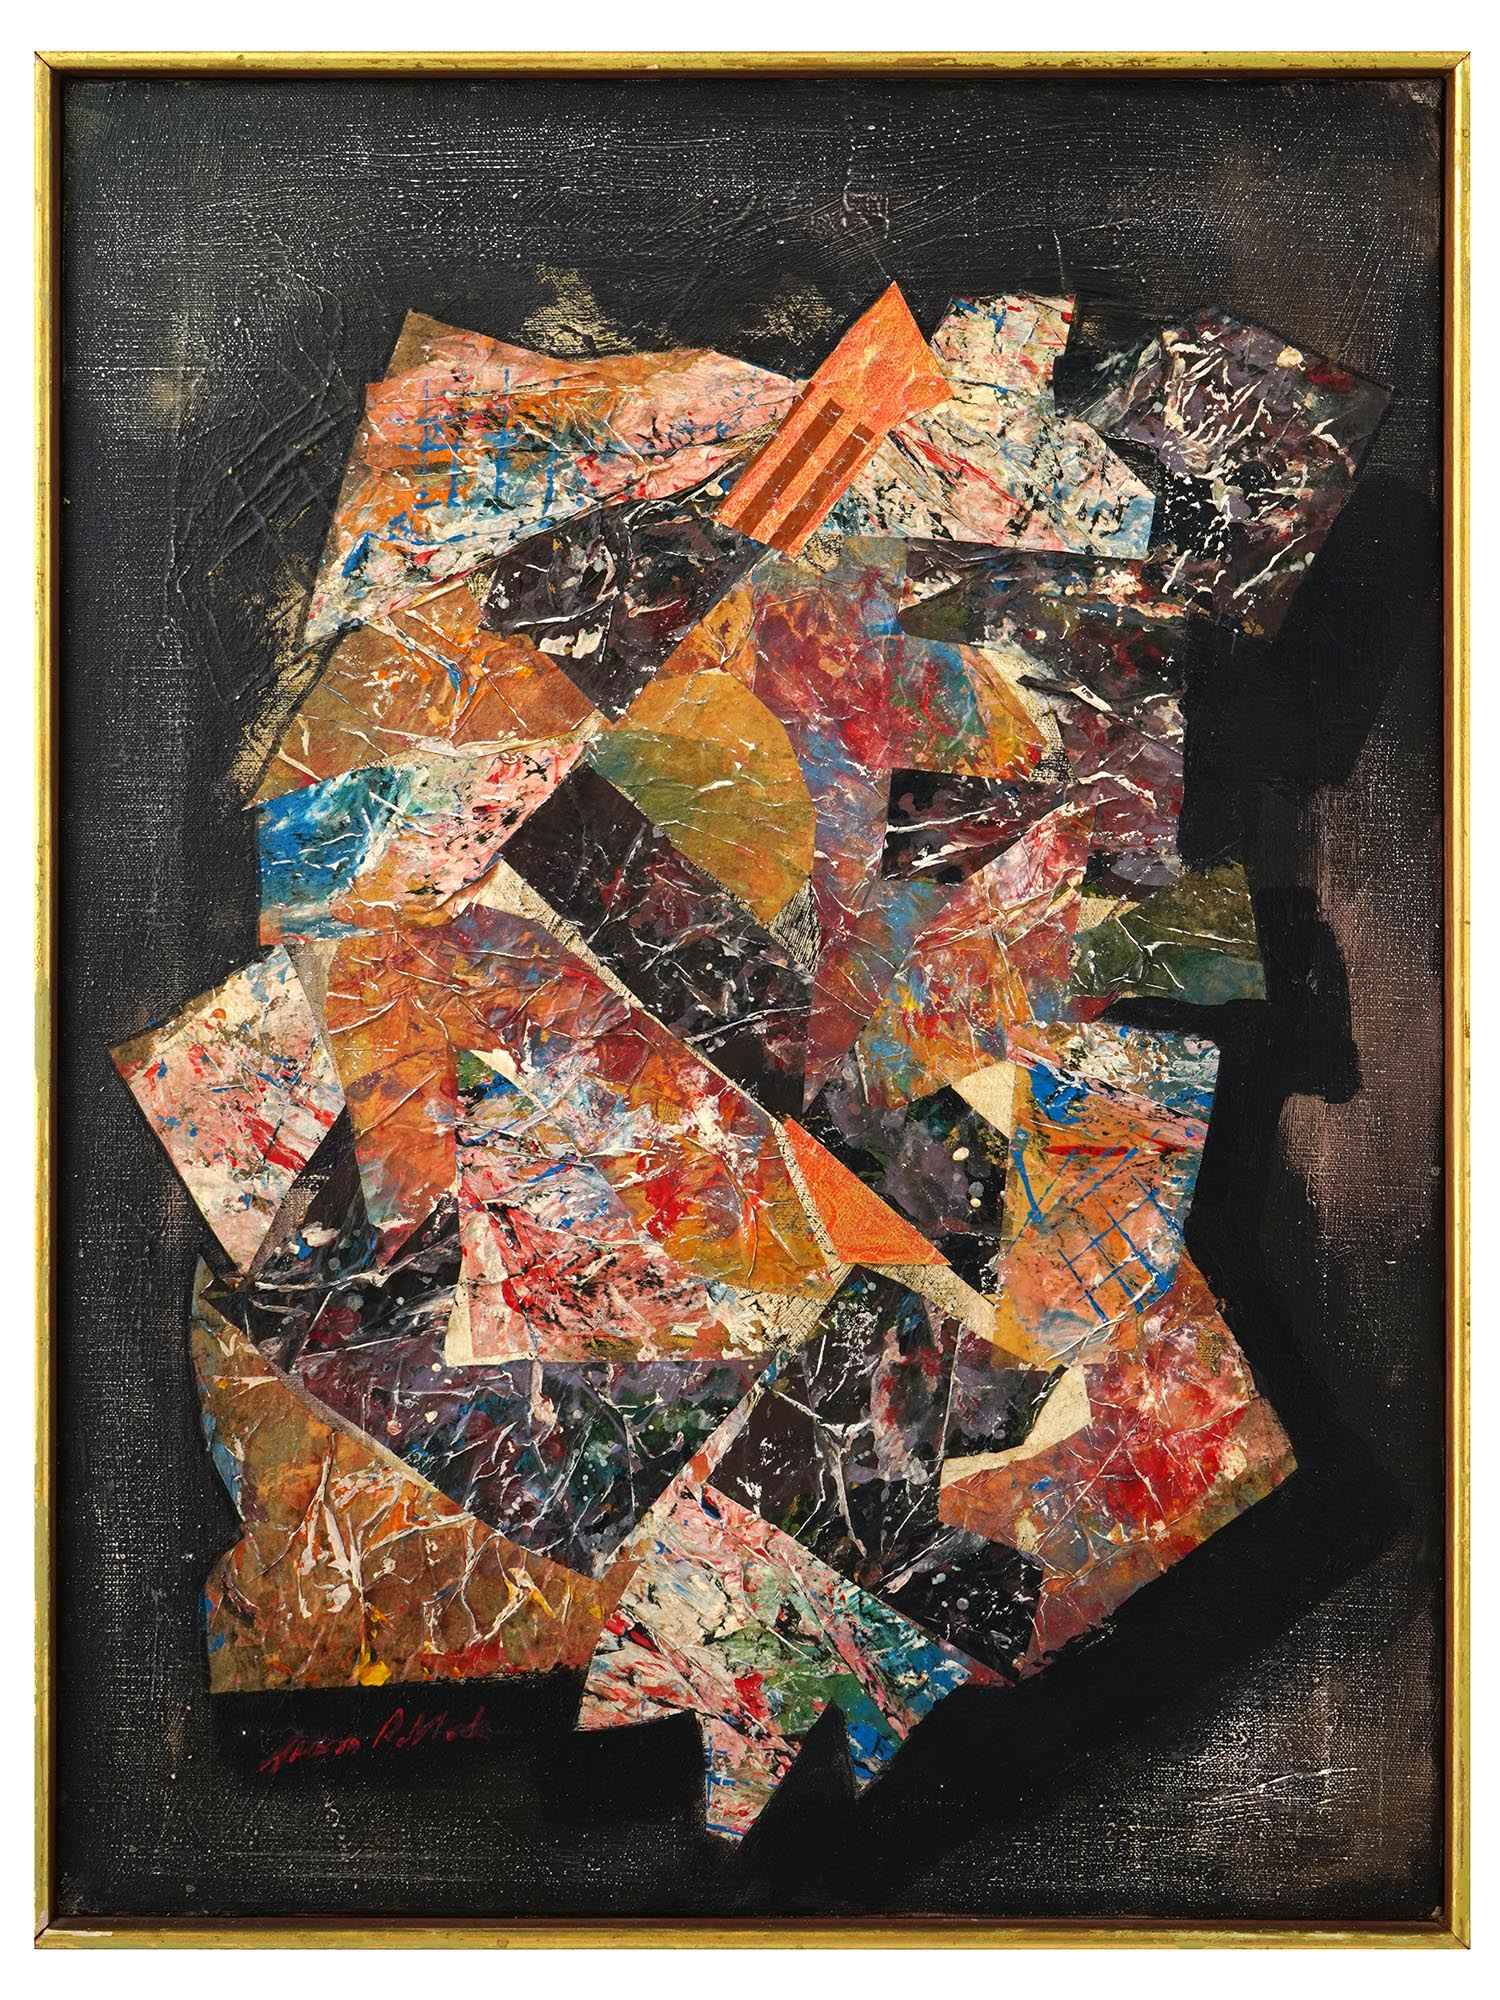 ATTRIBUTED TO JACKSON POLLOCK MIXED MEDIA PAINTING PIC-0